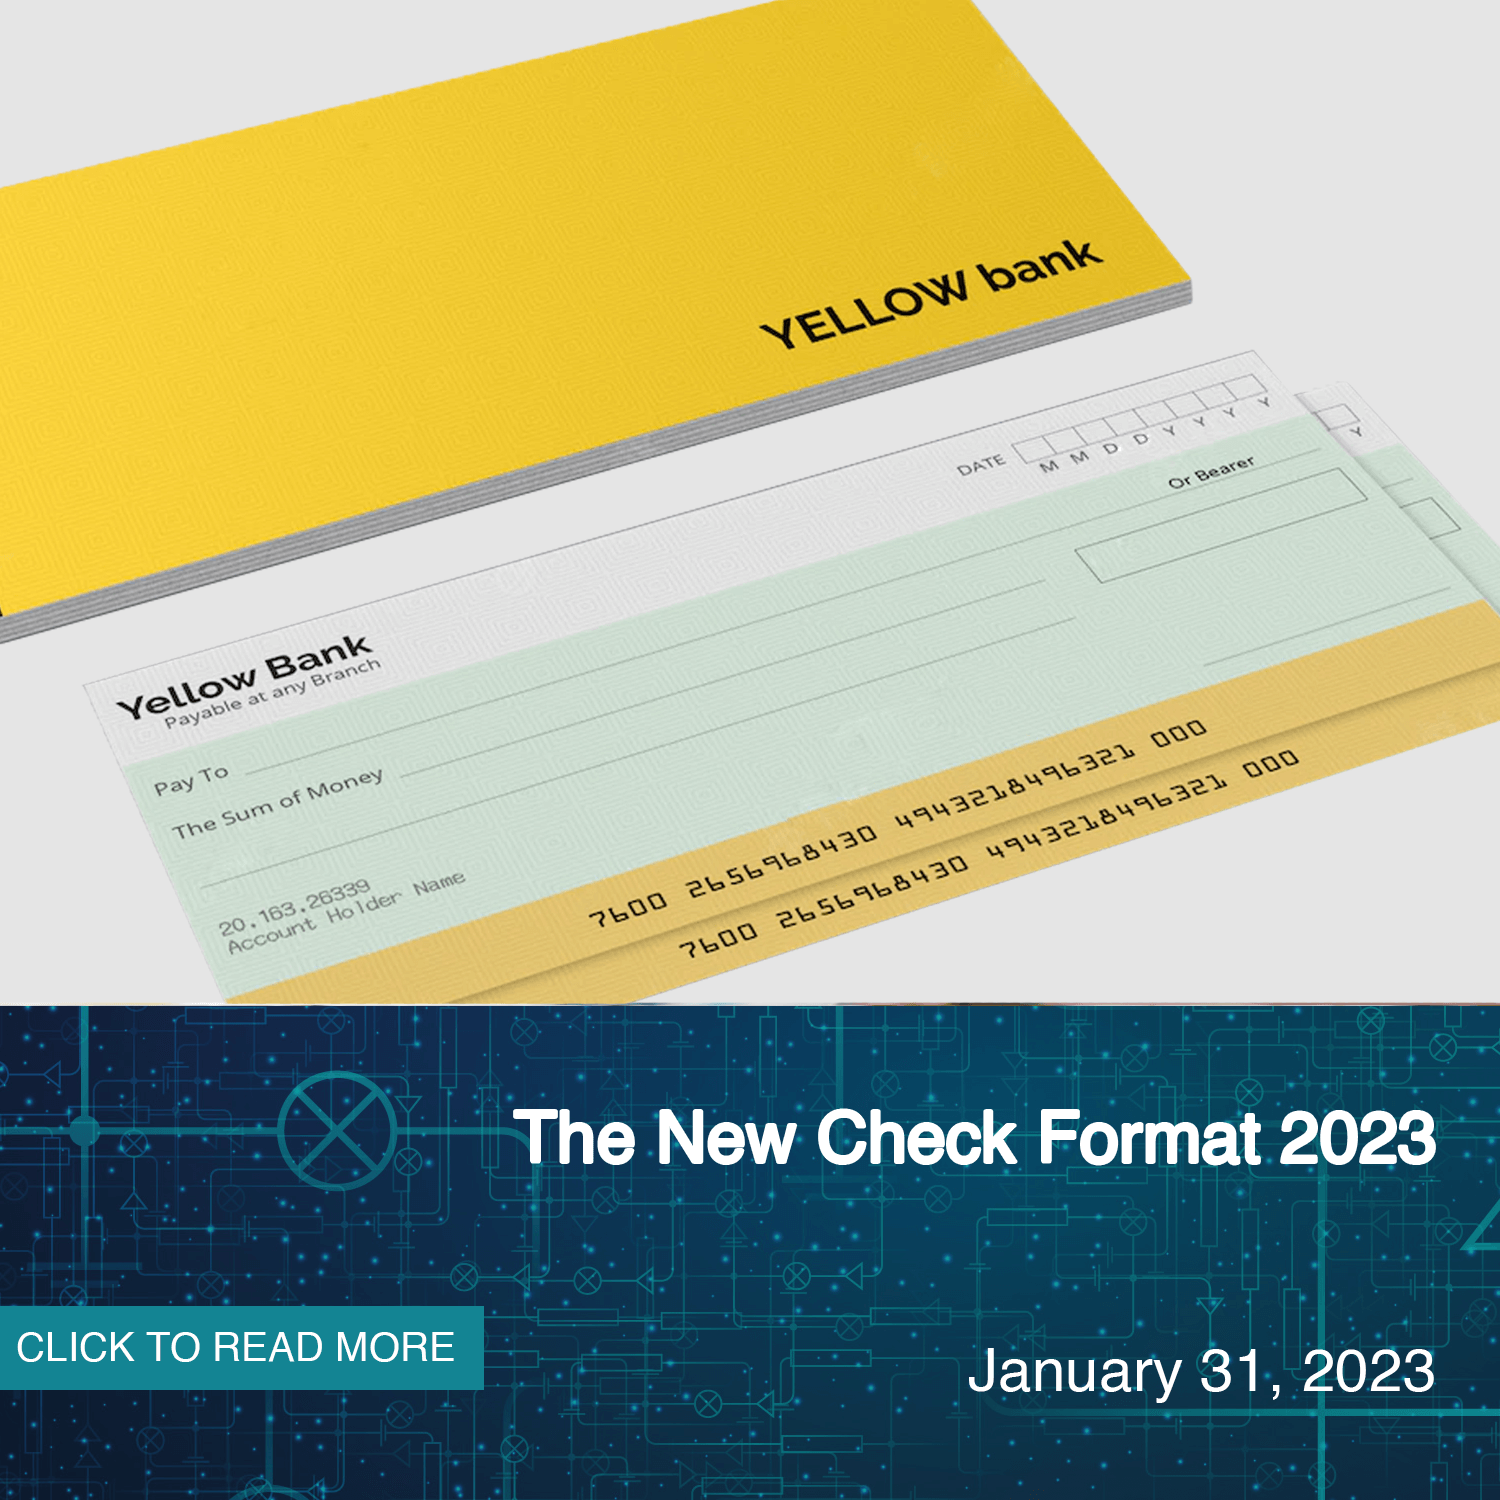 The New Check Format 2023